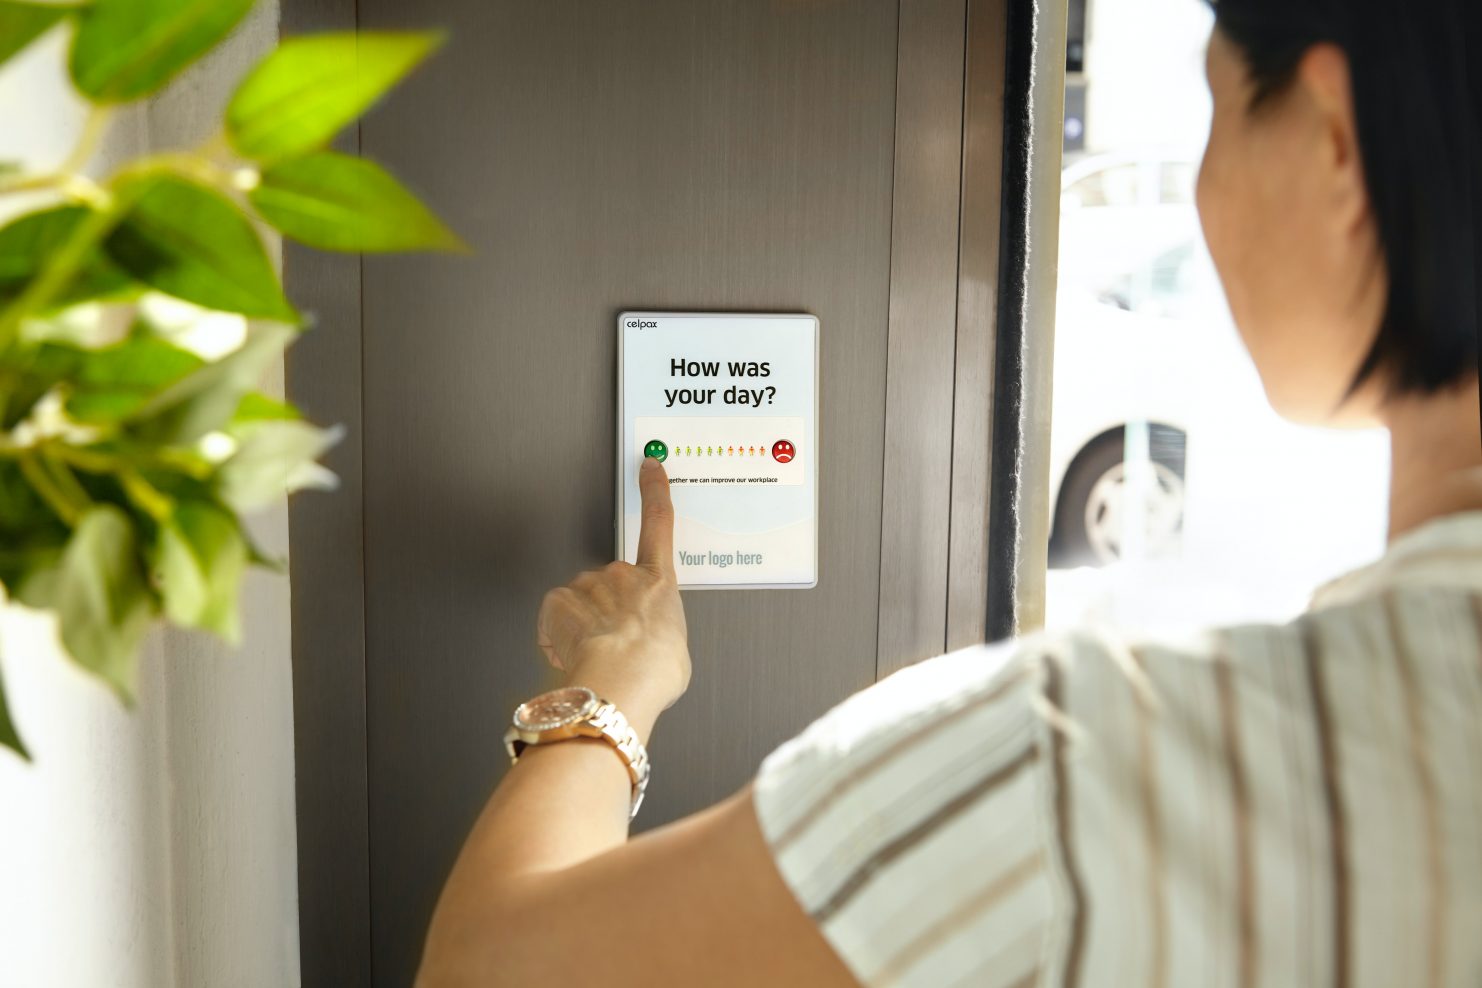 Female employee pressing a green button to give feedback on a device at the office exit door